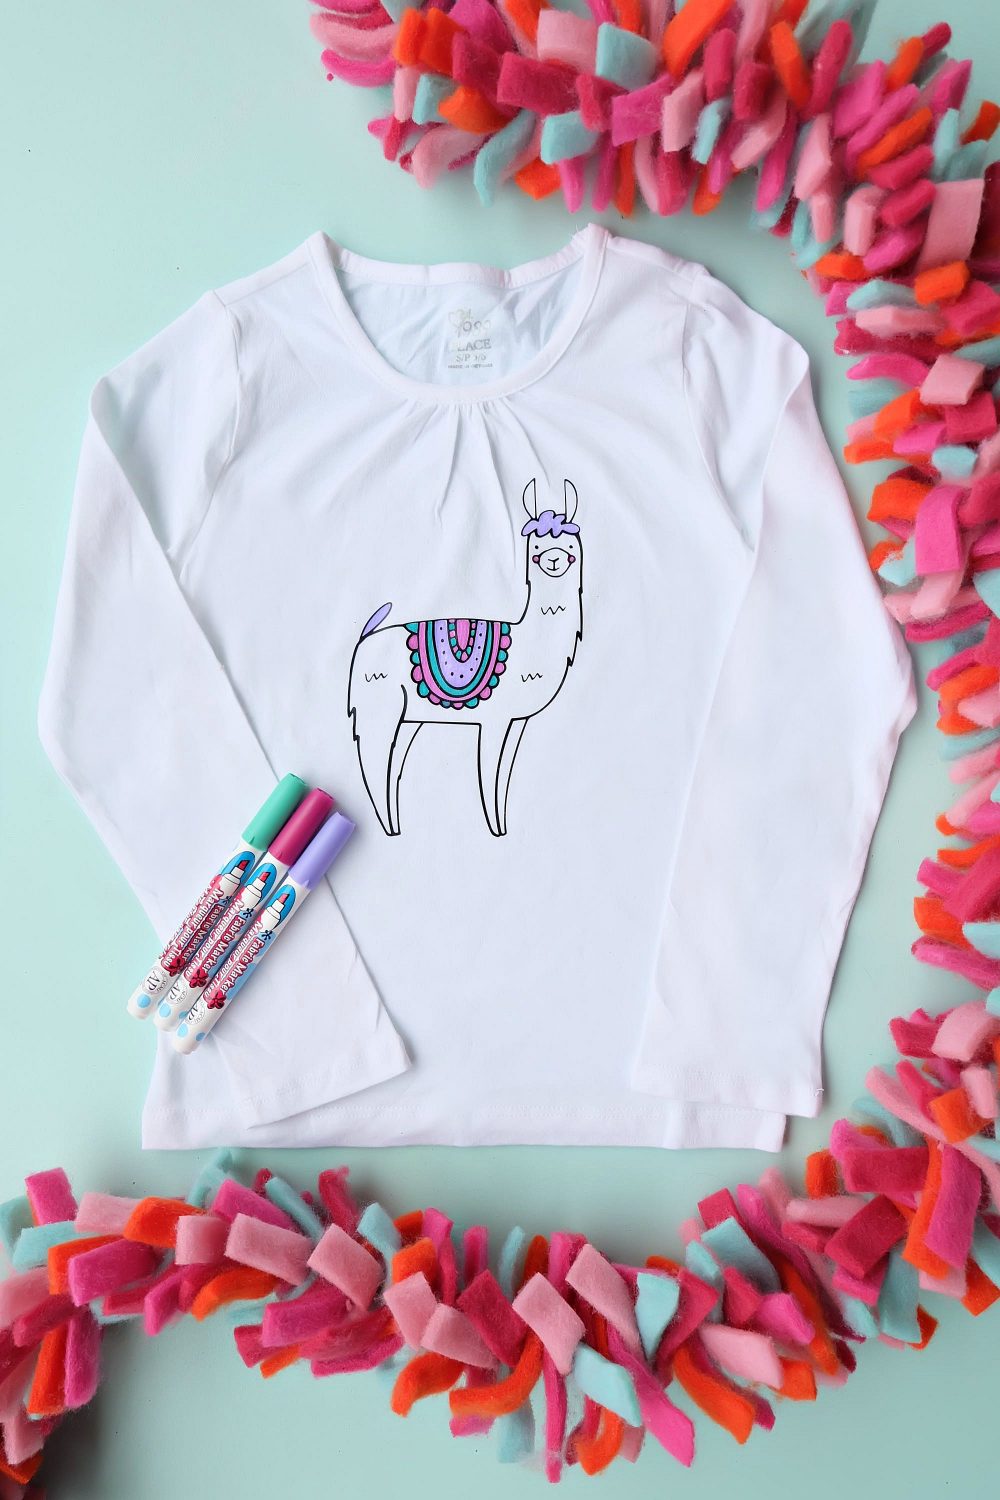 Are you in love with the llama crazy? We sure are! Make this Easy DIY Llama Coloring Shirt for a super fun handmade gift idea thats a kids craft and a piece of clothing in one! Cut using your Cricut Explore, Cricut Maker or Silhouette! #llamas #DIY #Cricut #Silhouette #Coloring